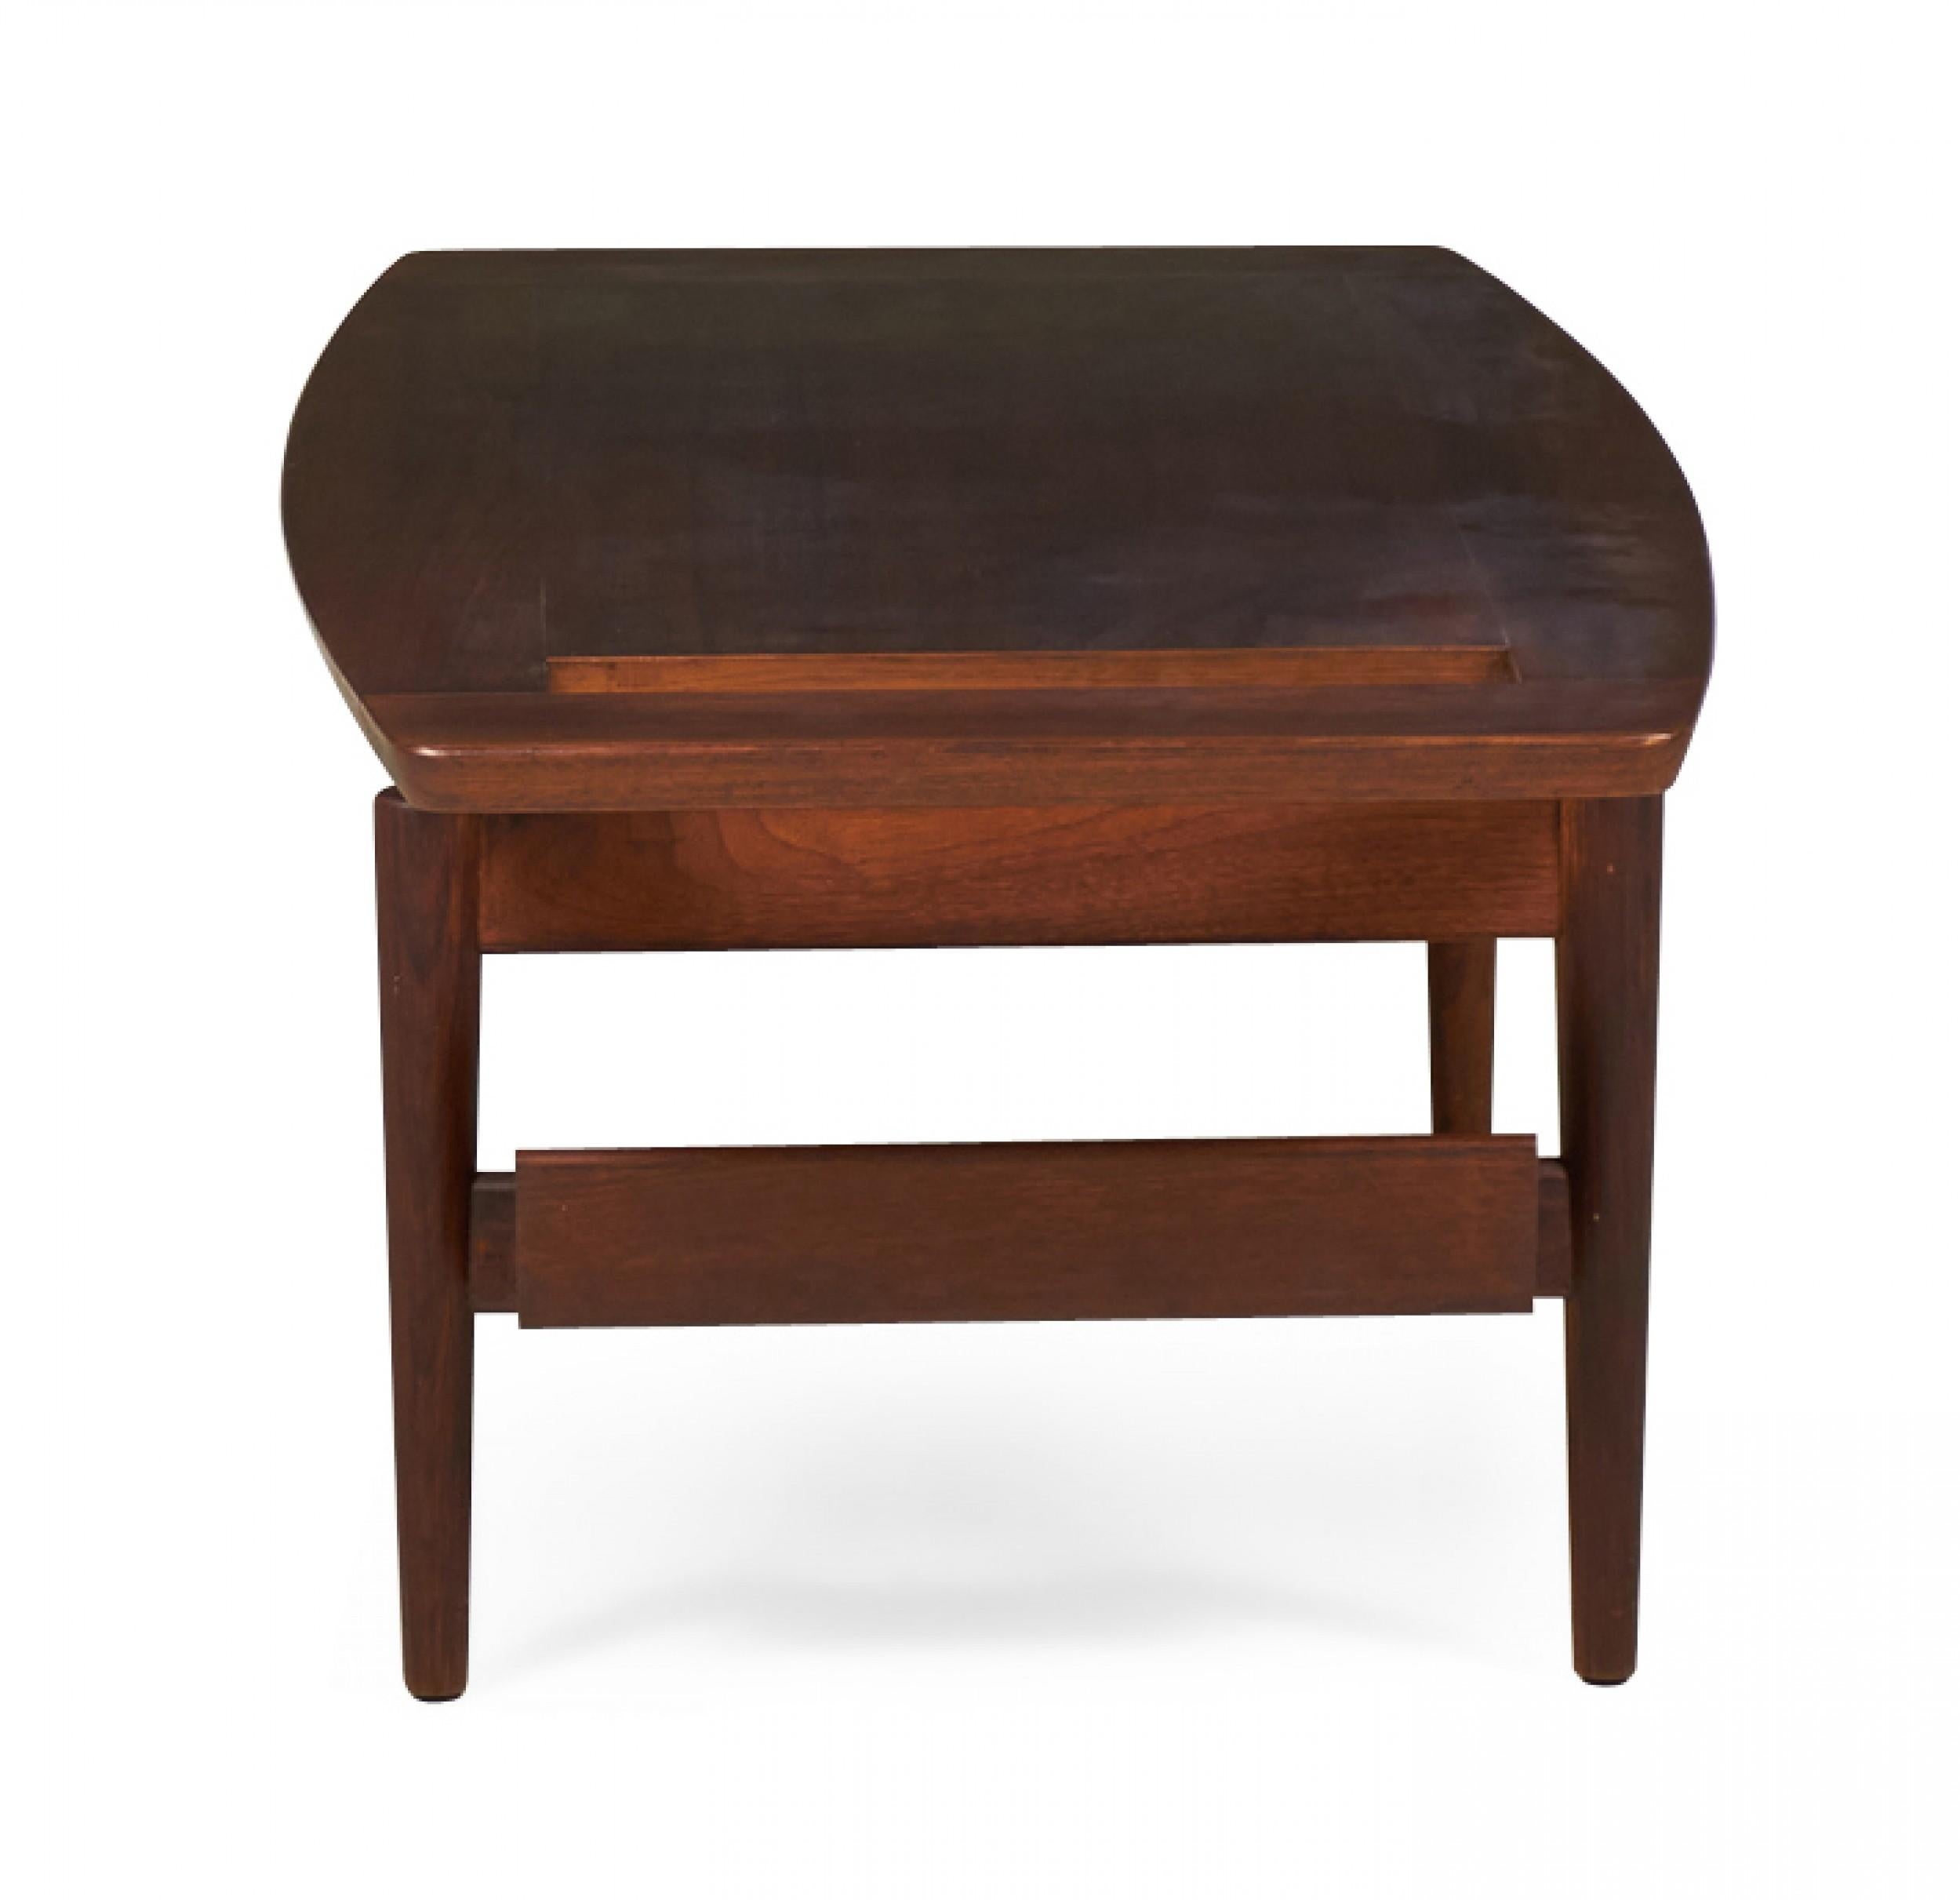 Danish Mid-Century walnut coffee table with a rectangular top with tapered edges and a rectangular cutout on one side resting on a stretcher base with built-in magazine rack and four tapered legs. (JENS RISOM) (Similar table: DUF0098A)
